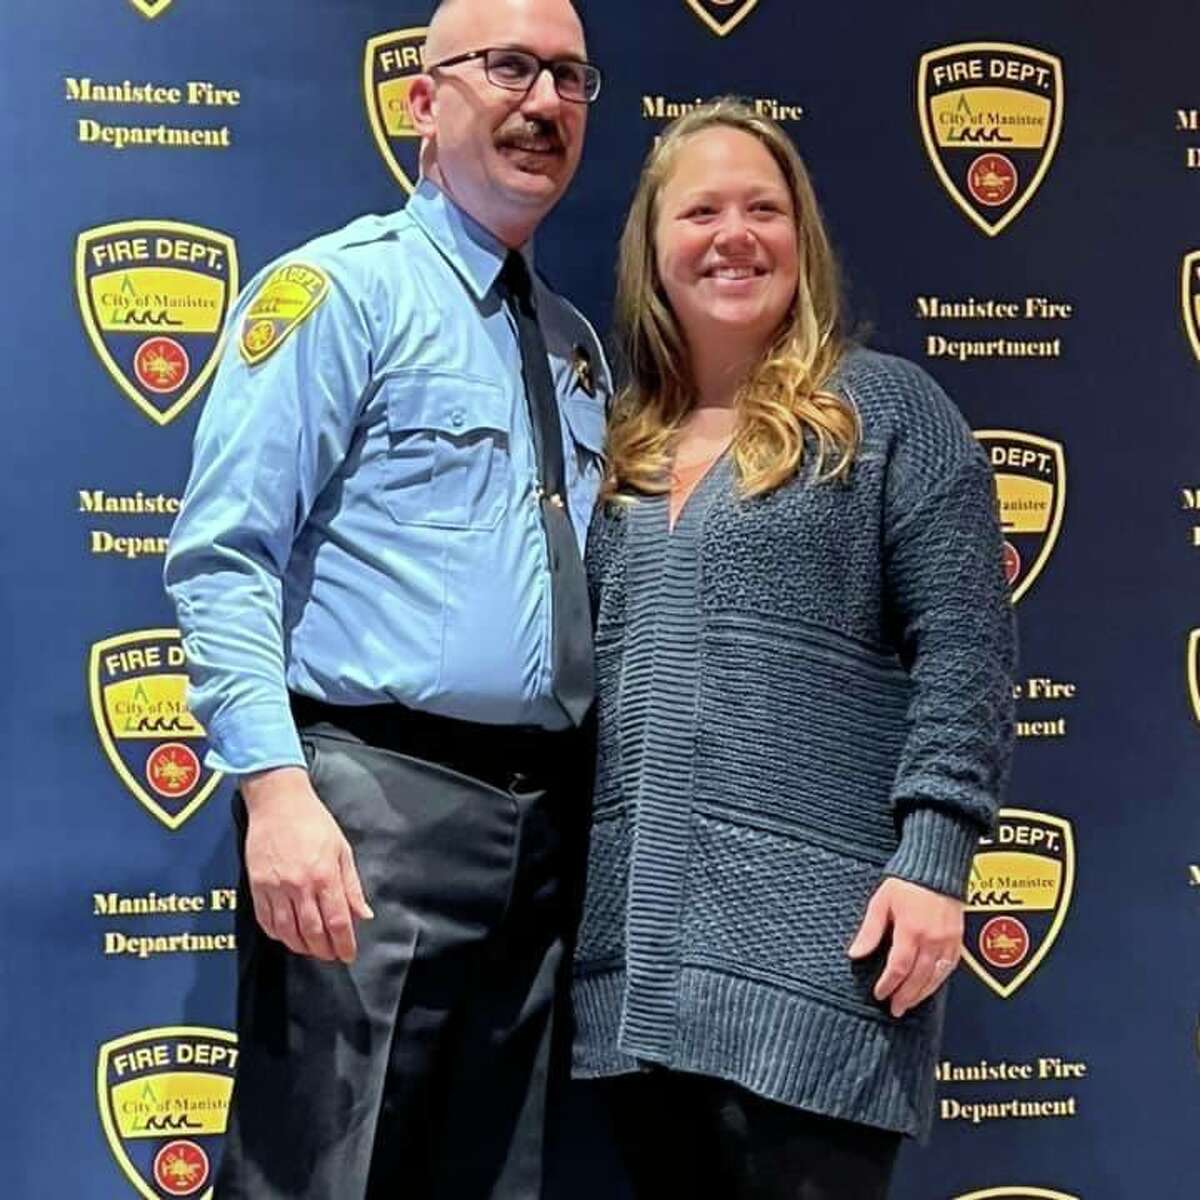 Chris Jeffries and Erica Jeffries stand side by side after performing the pinning ceremony marking him as a Manistee City Fire Department captain. 